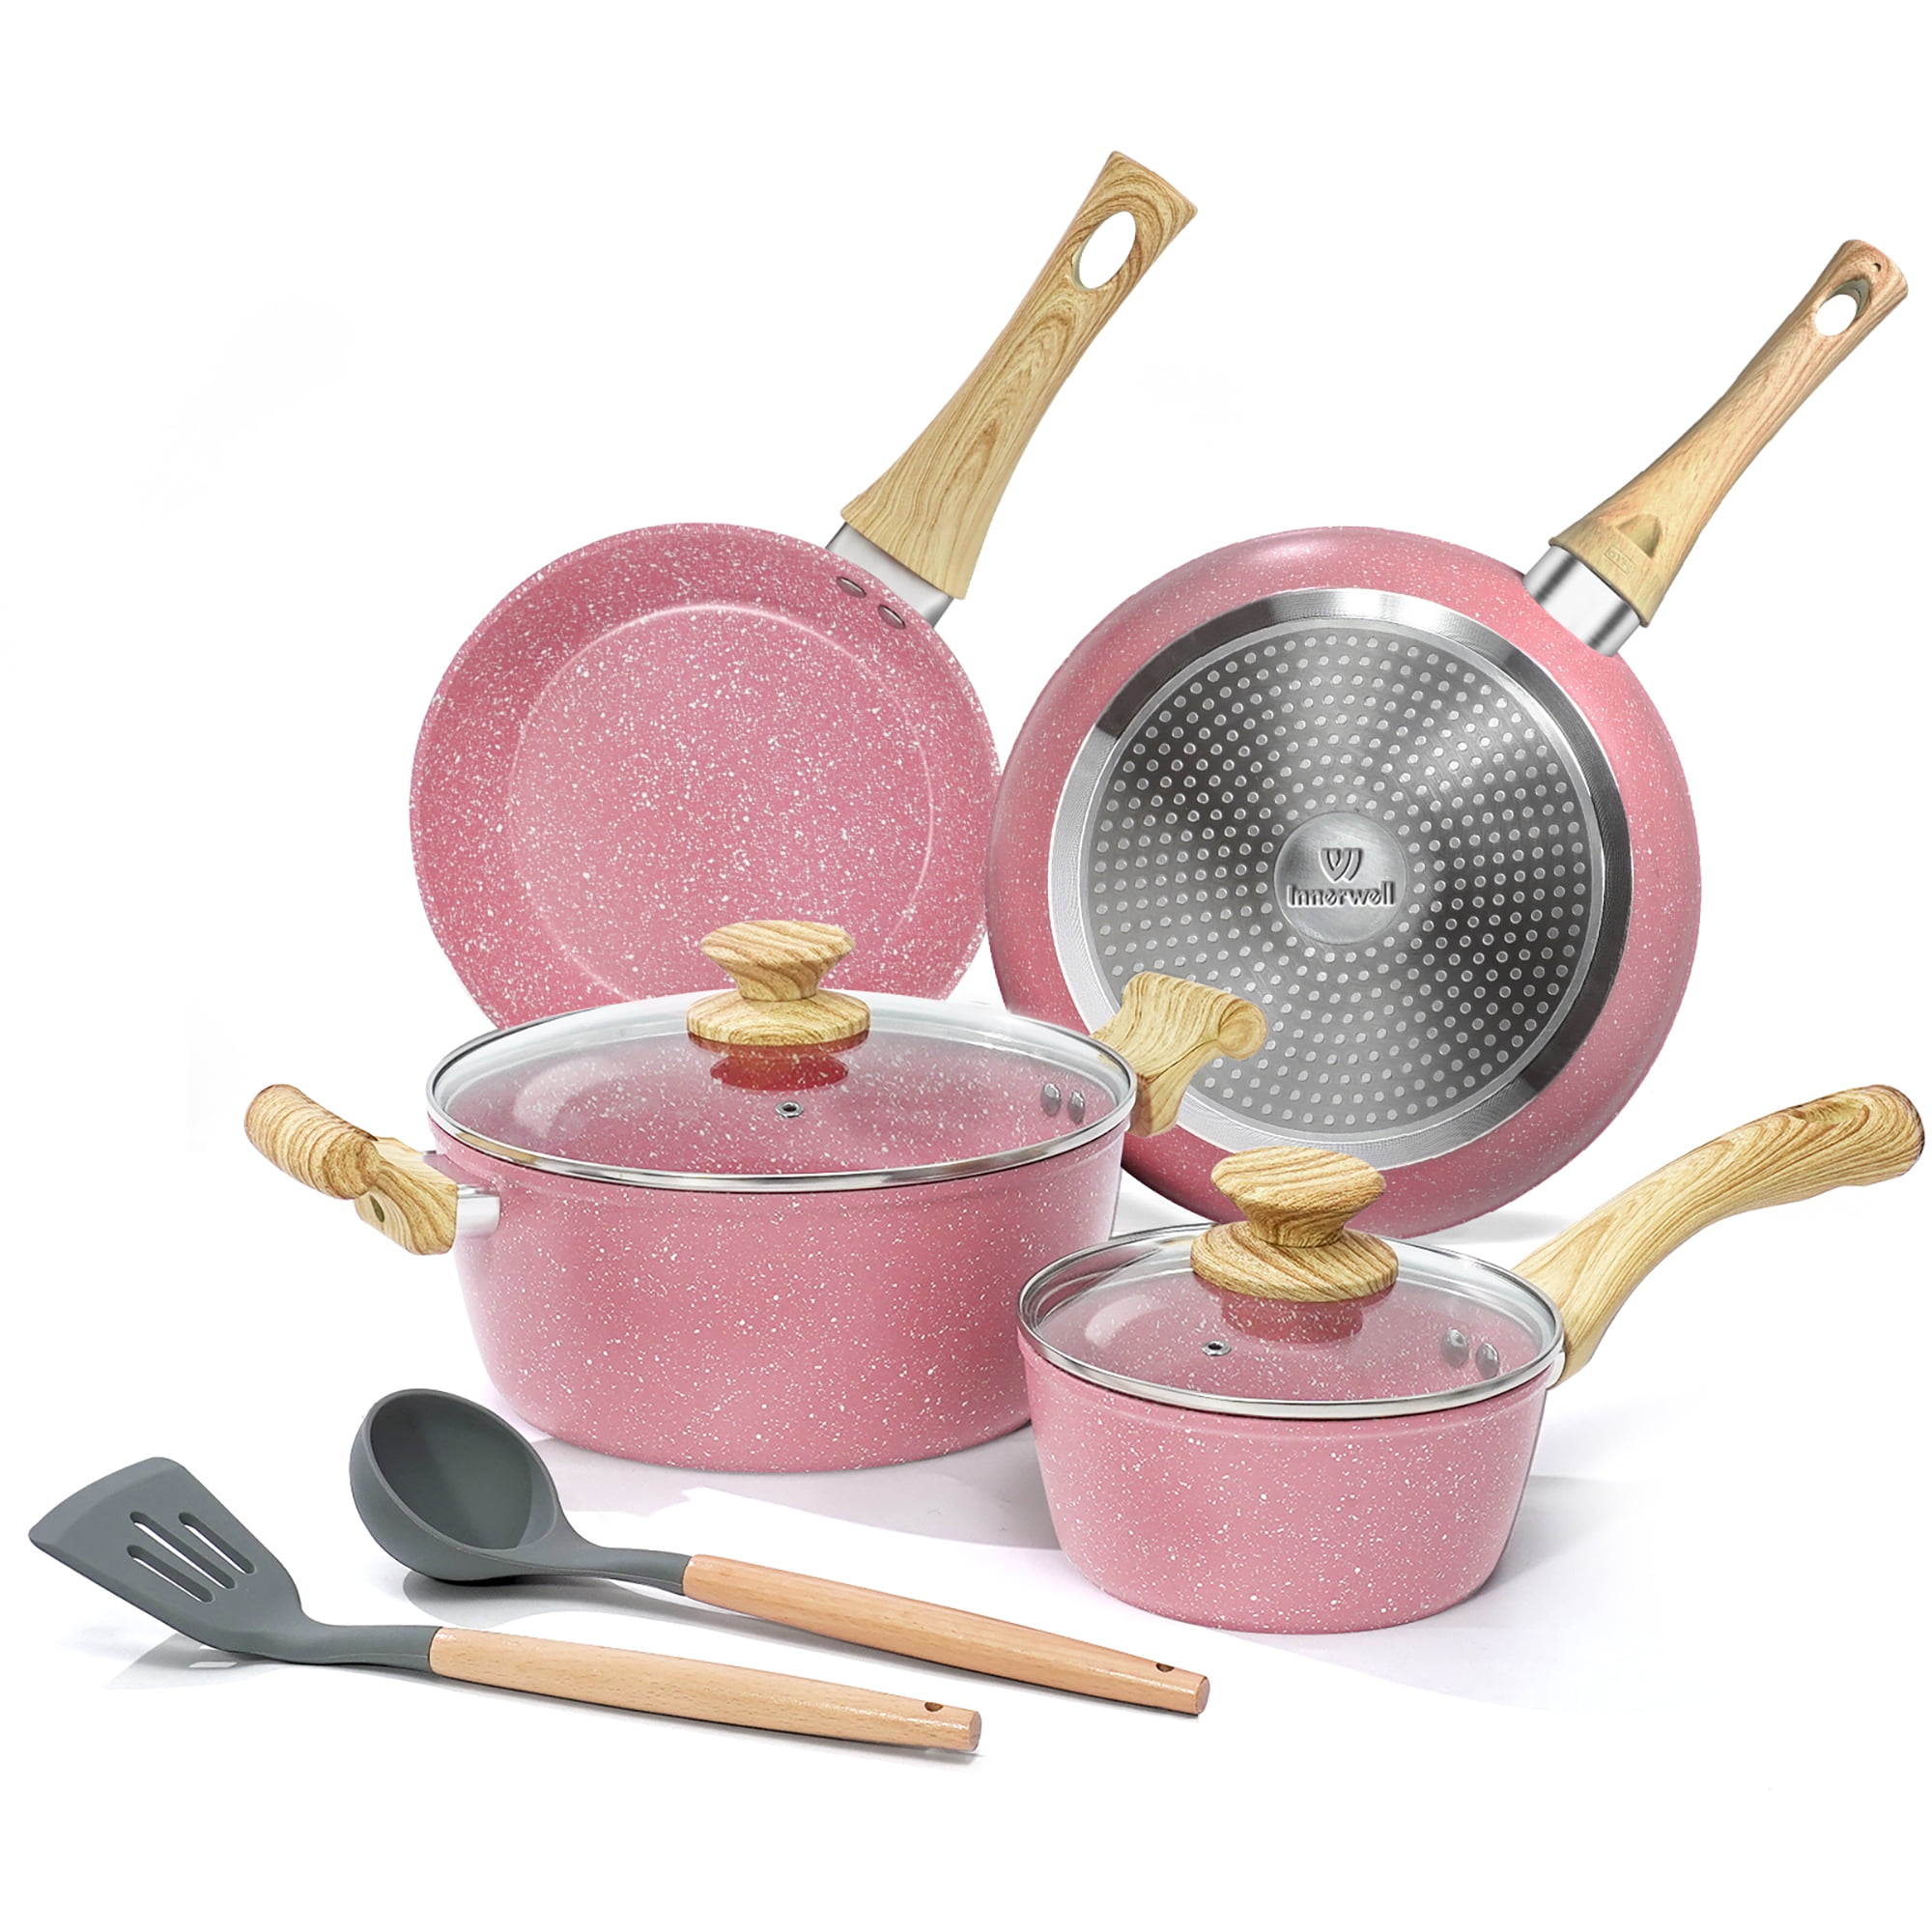 Upgrade your kitchen cookware with this pink ten-piece pot and